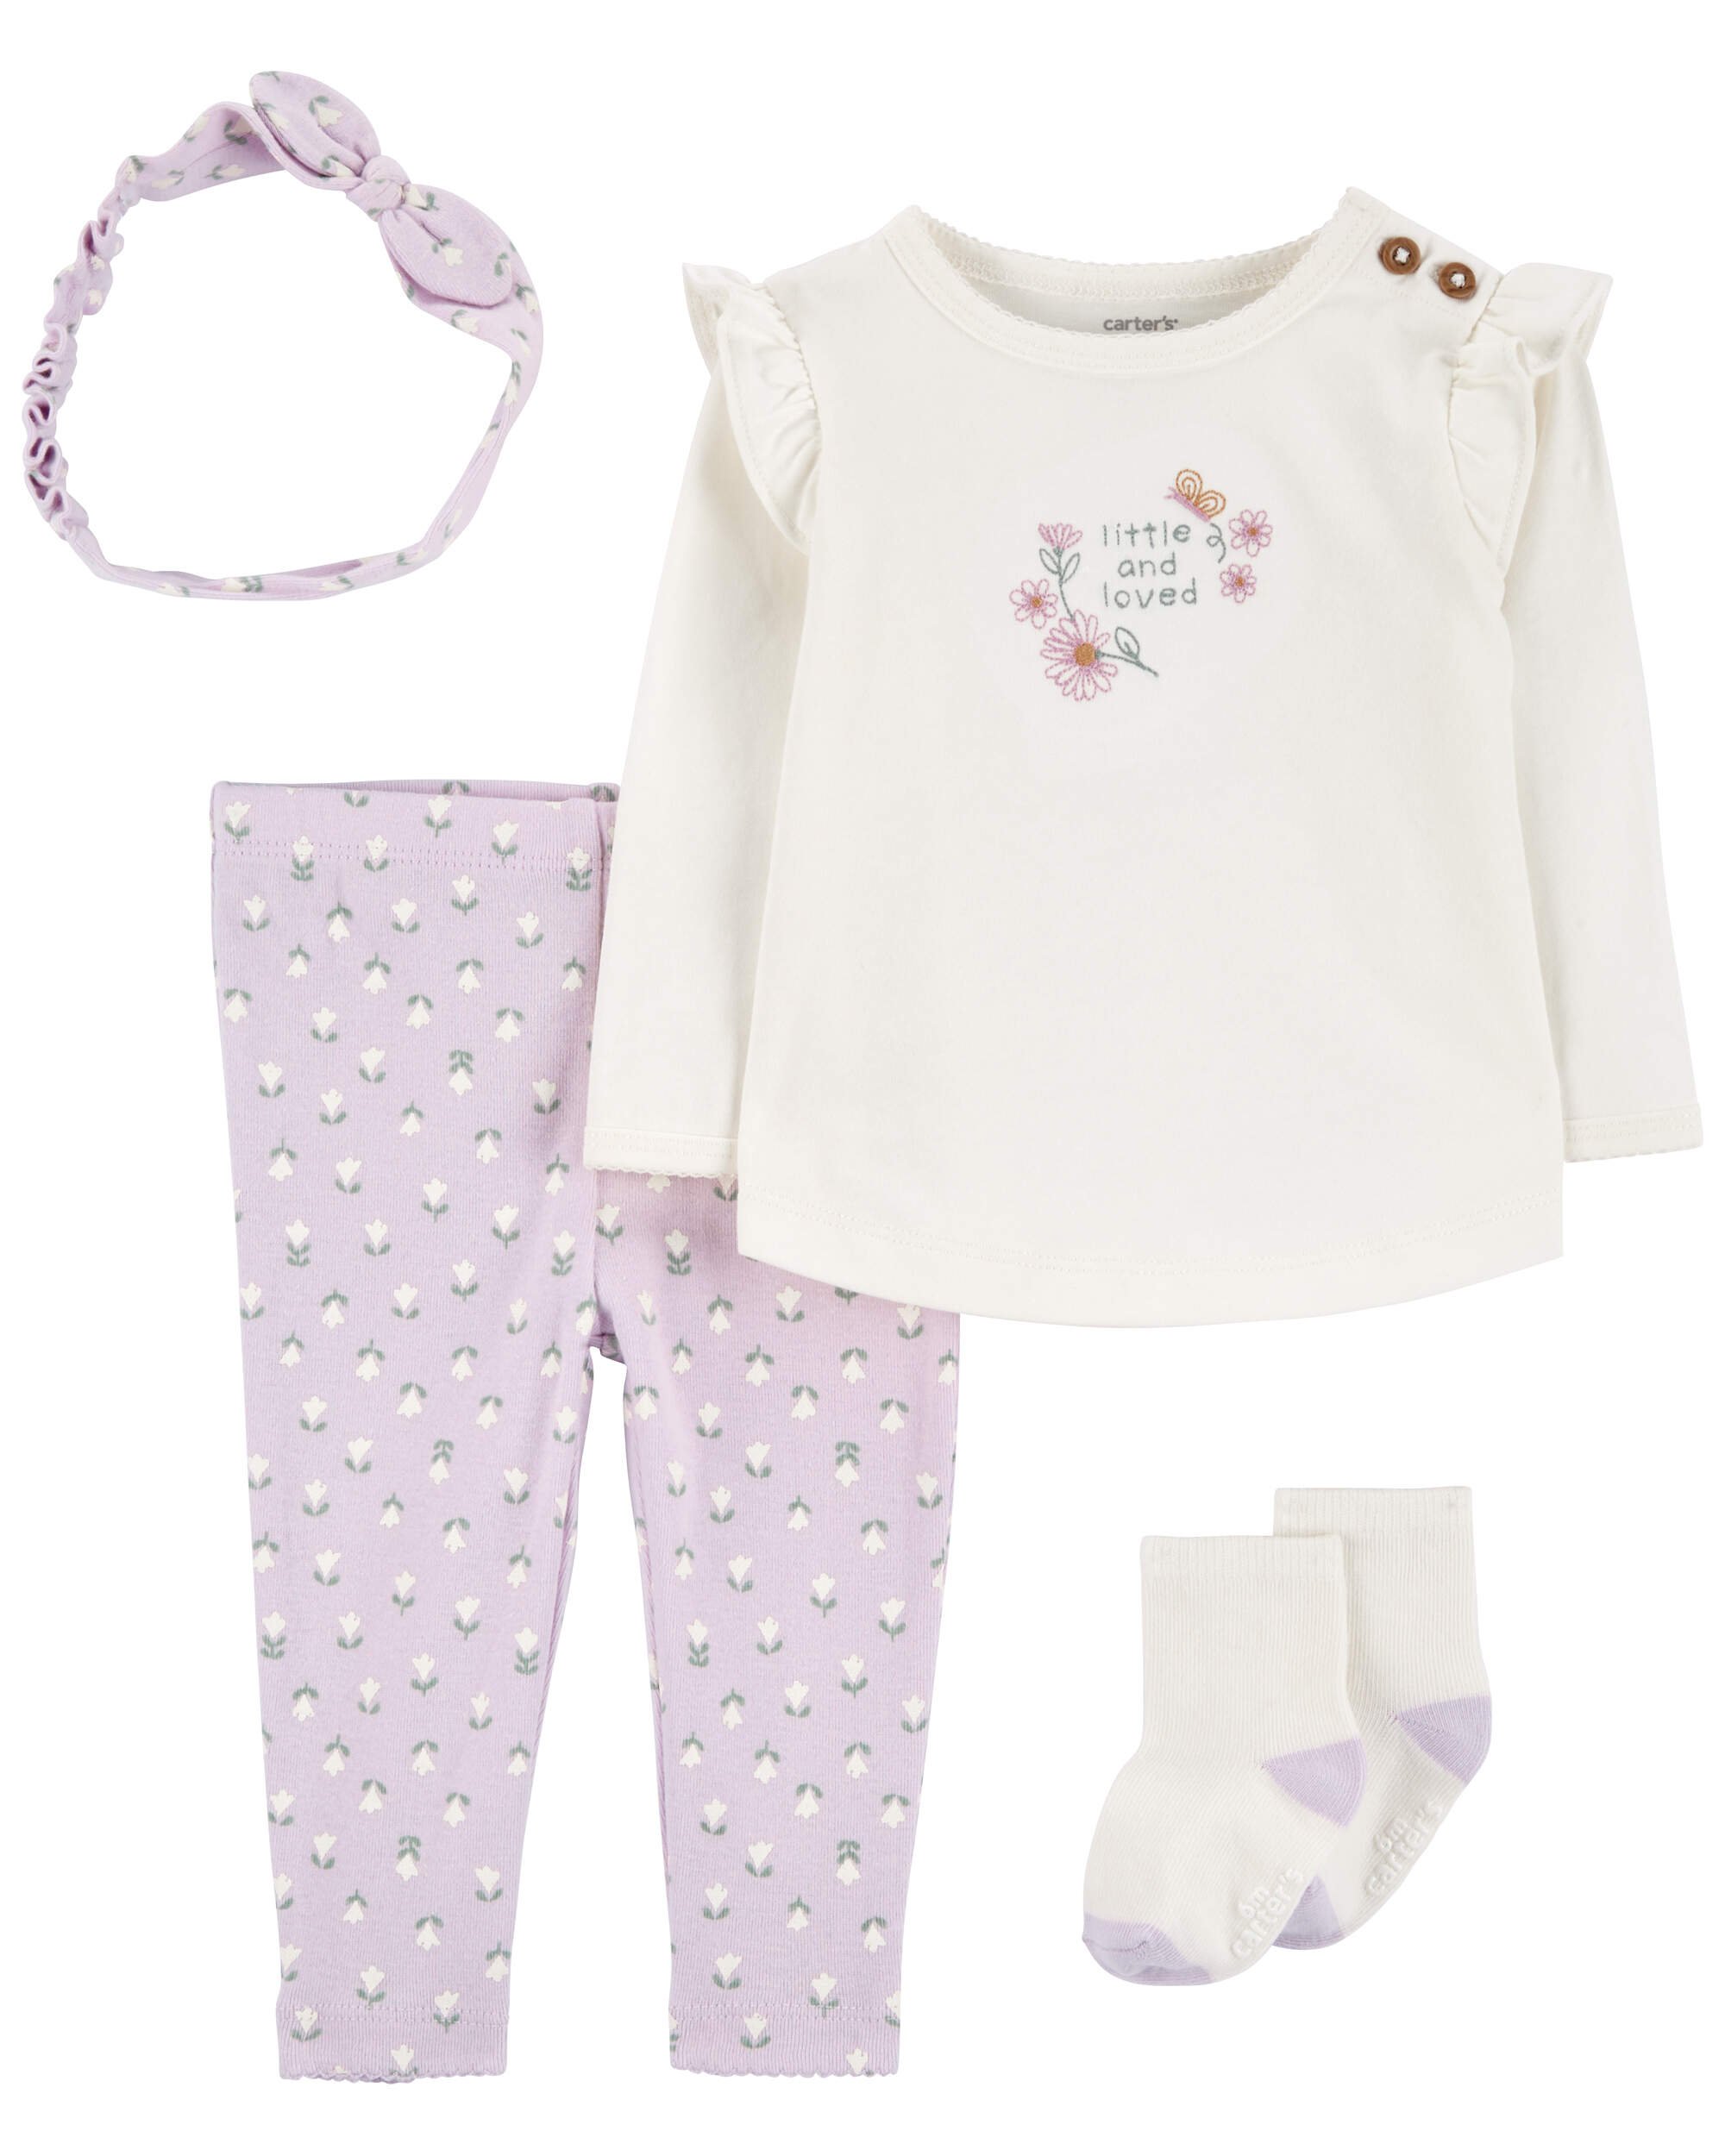 Baby 4-Piece Floral Outfit Set